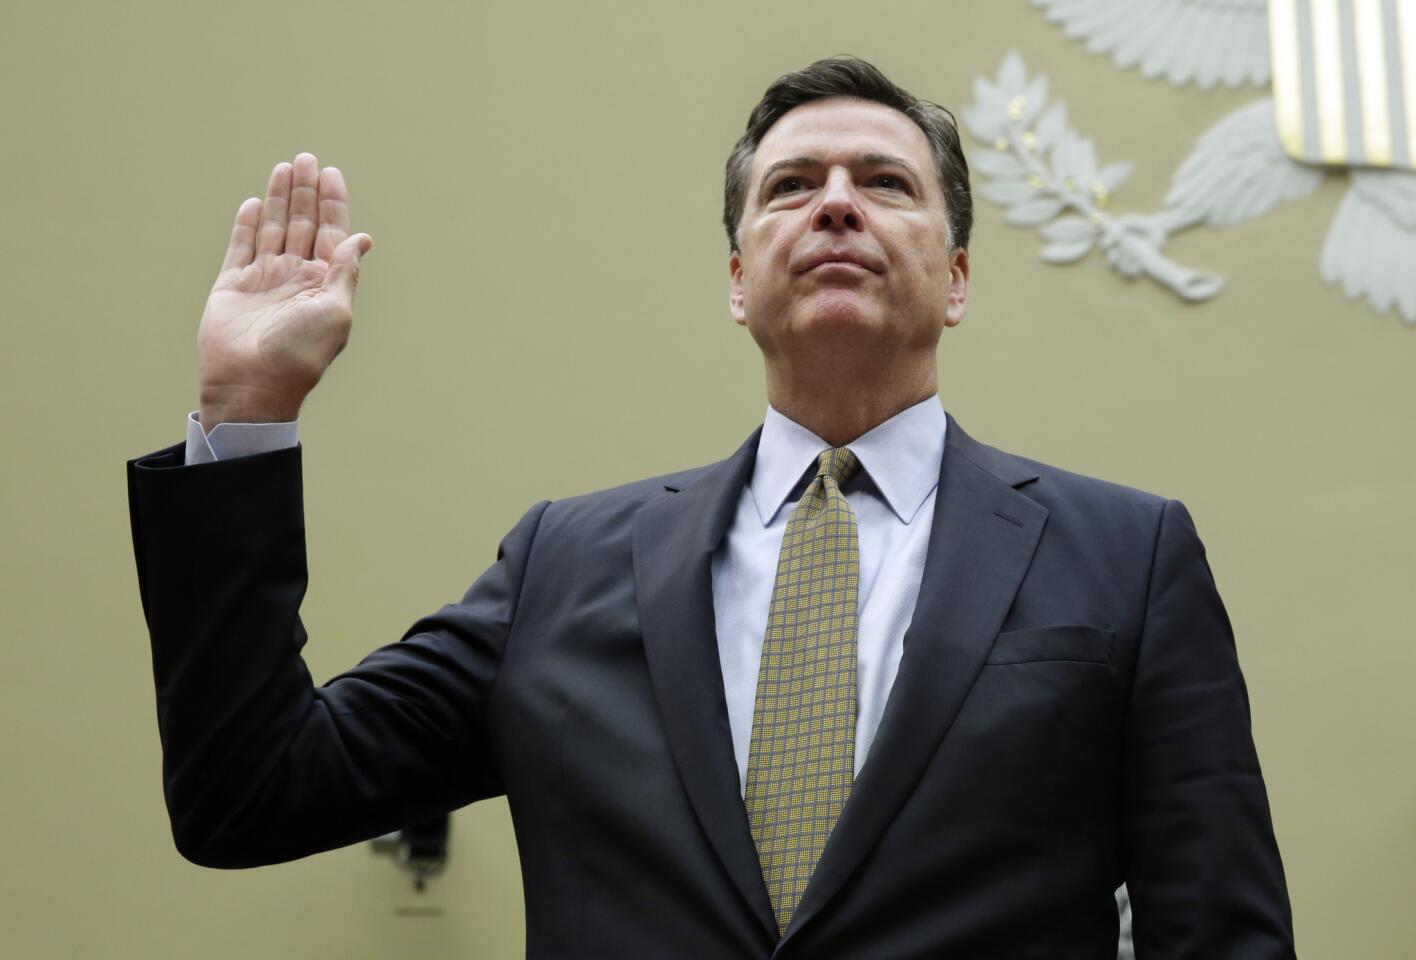 FBI Director James Comey is sworn-in before a House Oversight and Government Reform Committee hearing on Capitol Hill in Washington, DC, on July 7, 2016.